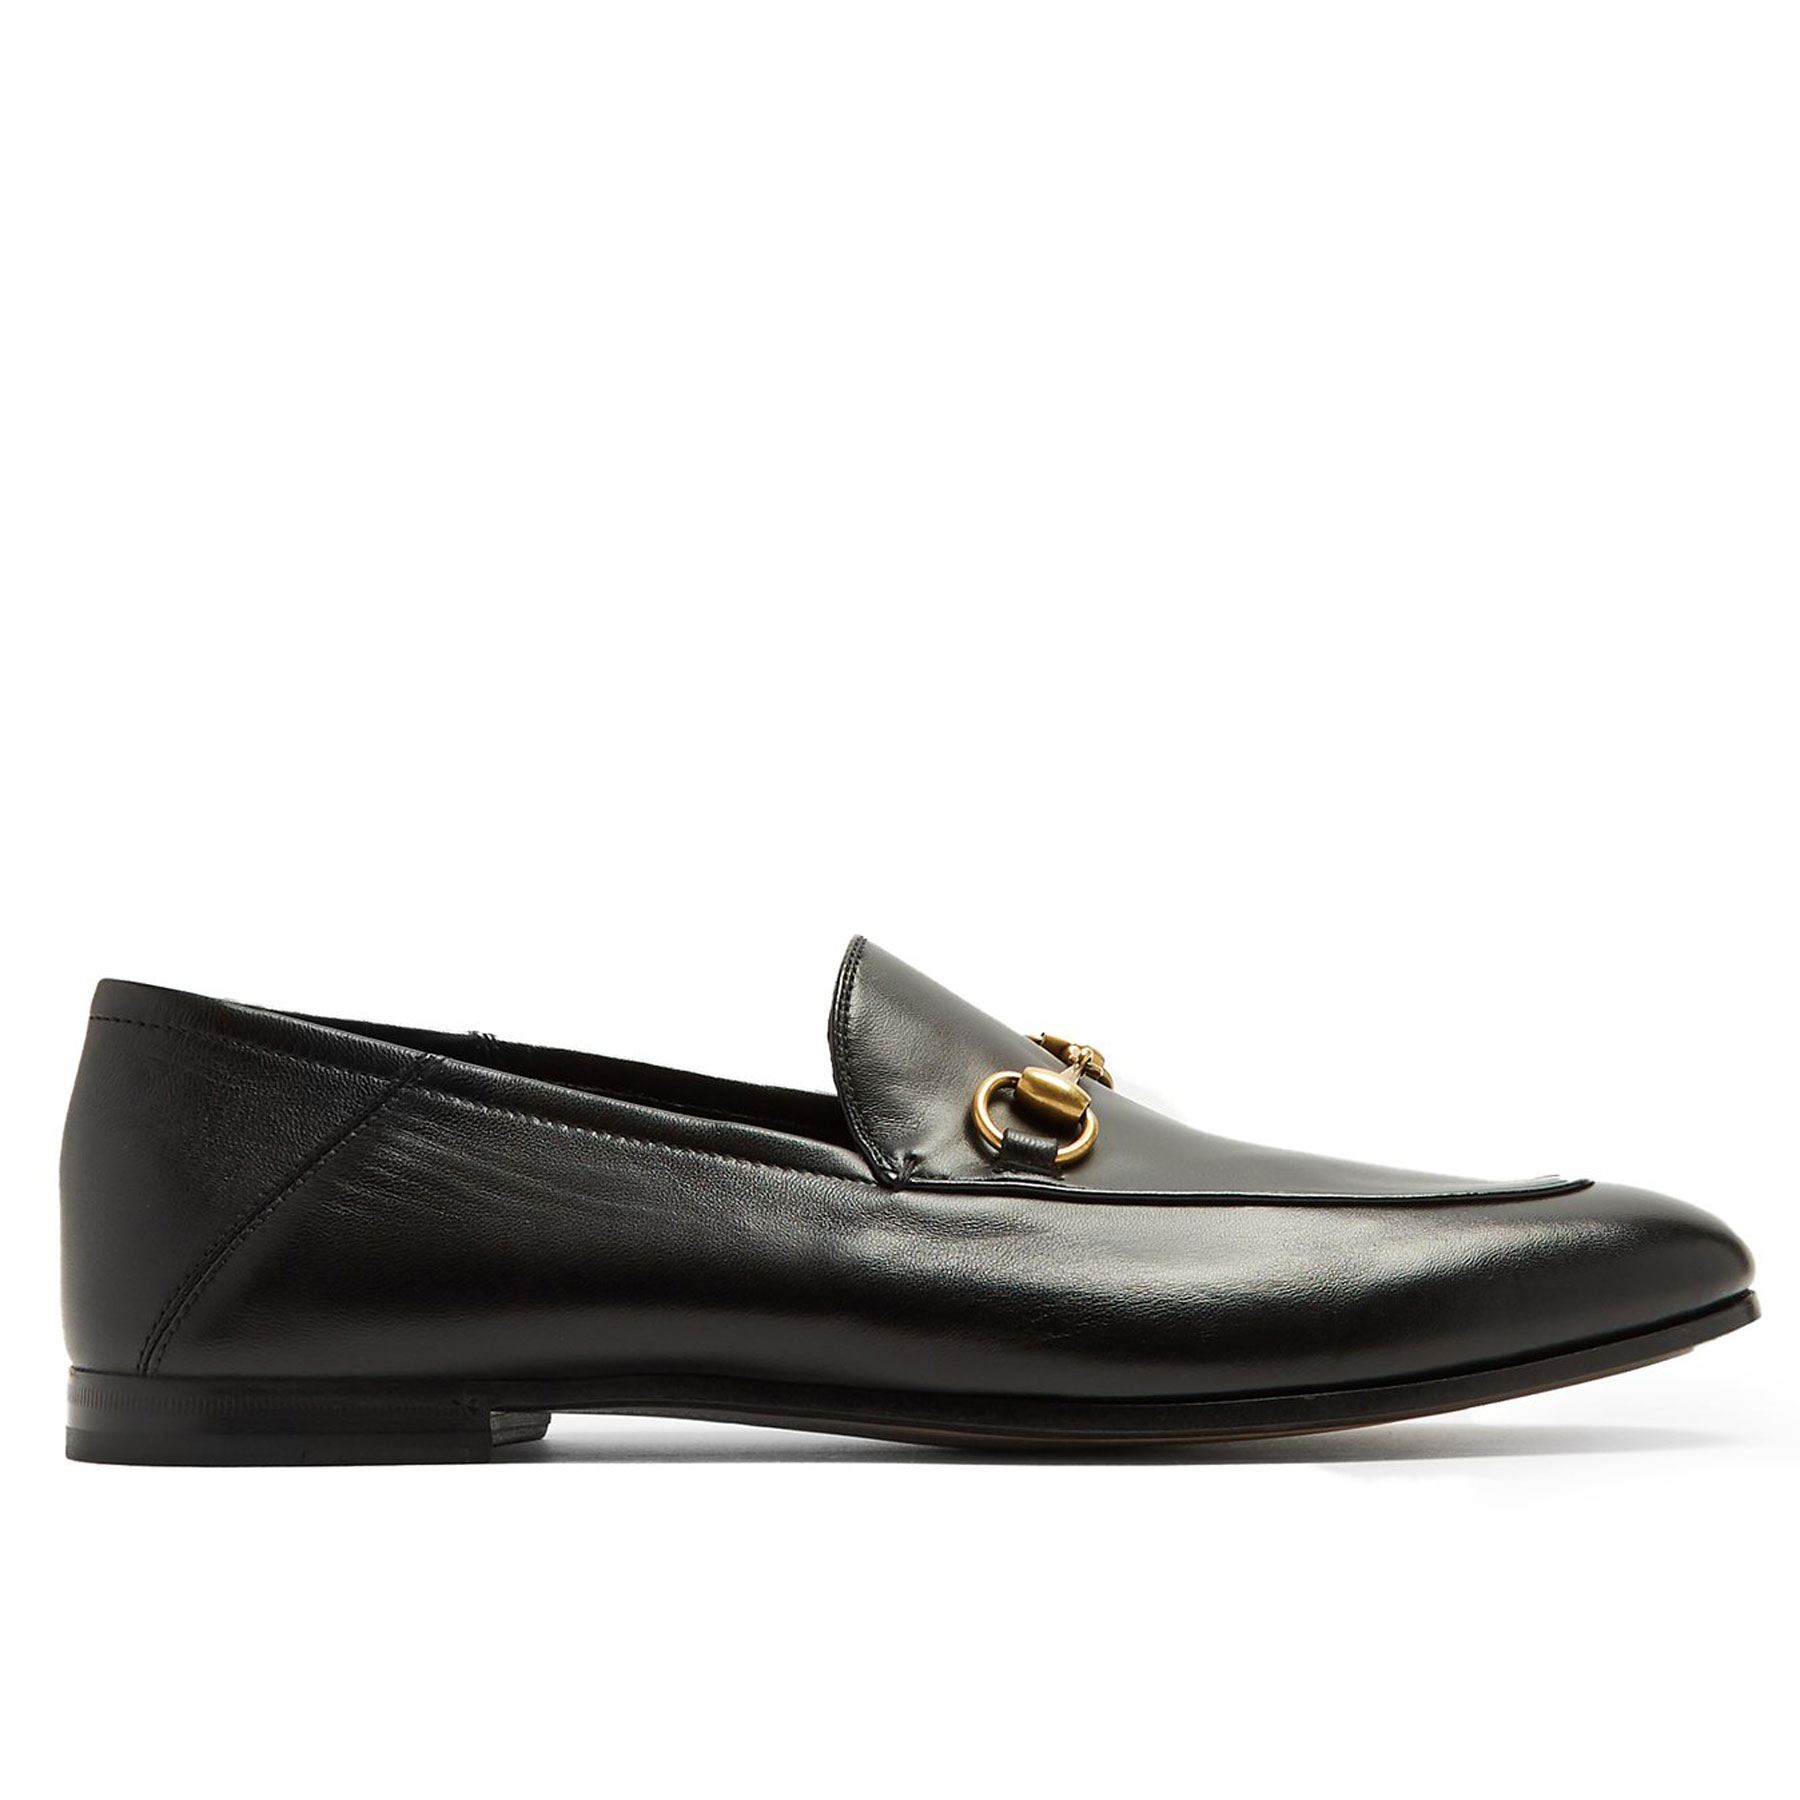 Top 31+ imagen gucci brixton loafers